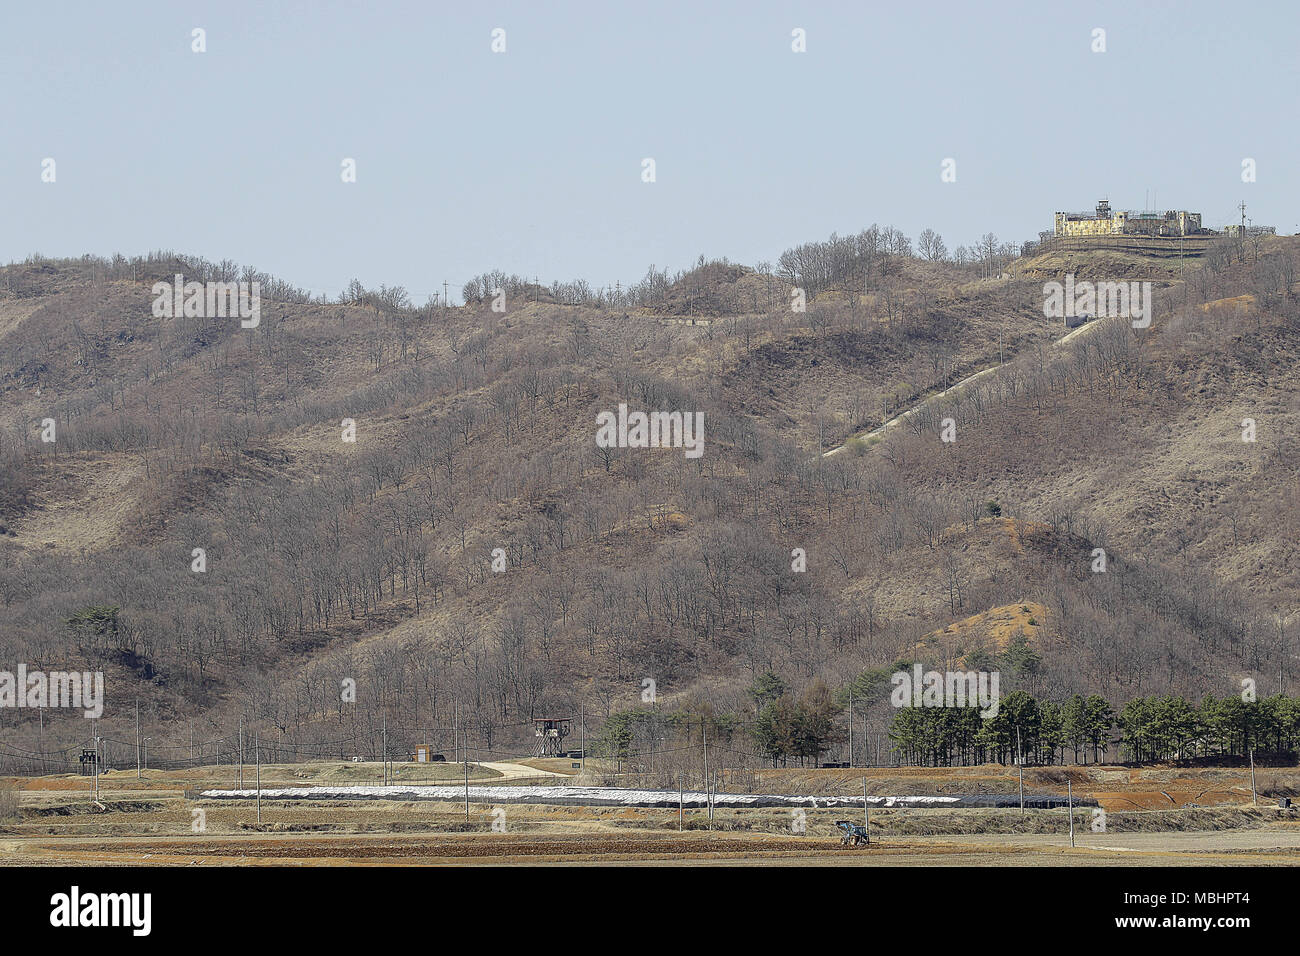 Cheorwon, GANGWON, SOUTH KOREA. 11th Apr, 2018. April 11, 2018-Goyang, South Korea-A View of Korean War battle of white horse and the Civilian Control Line in Cheorwon, South Korea. The Battle of White Horse was another in a series of bloody battles for dominant hilltop positions during the Korean War. Baengma-goji was a 395-metre (1,296 ft) hill in the Iron Triangle, formed by Pyonggang at its peak and Gimhwa-eup and Cheorwon at its base, was a strategic transportation route in the central region of the Korean peninsula. White Horse was the crest of a forested hill mass that extended in a n Stock Photo